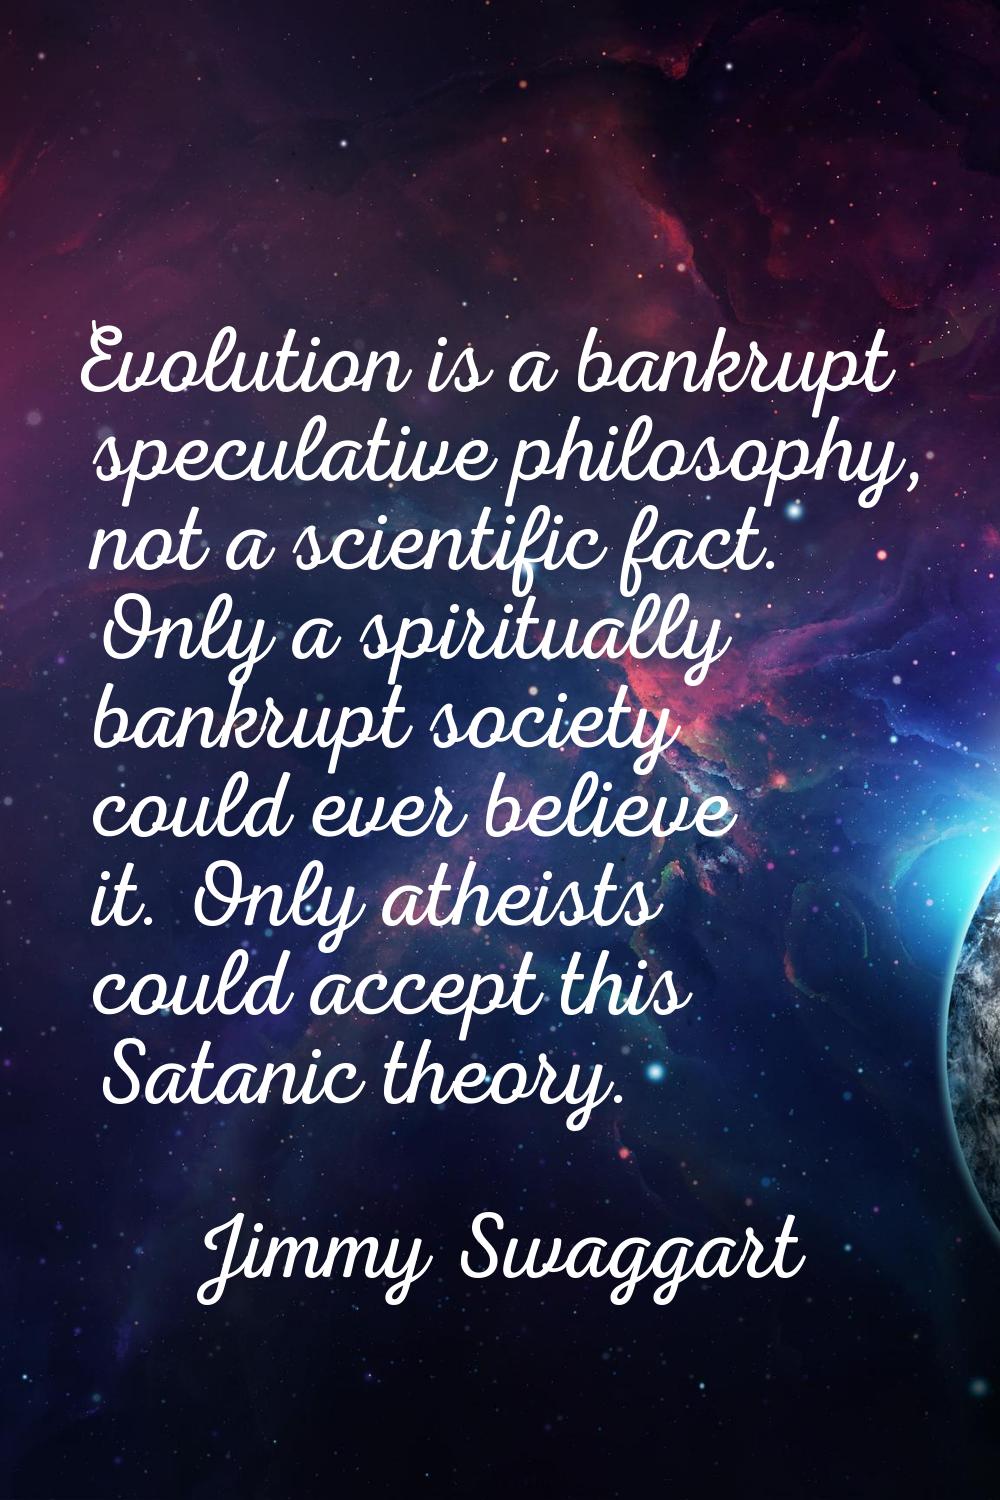 Evolution is a bankrupt speculative philosophy, not a scientific fact. Only a spiritually bankrupt 